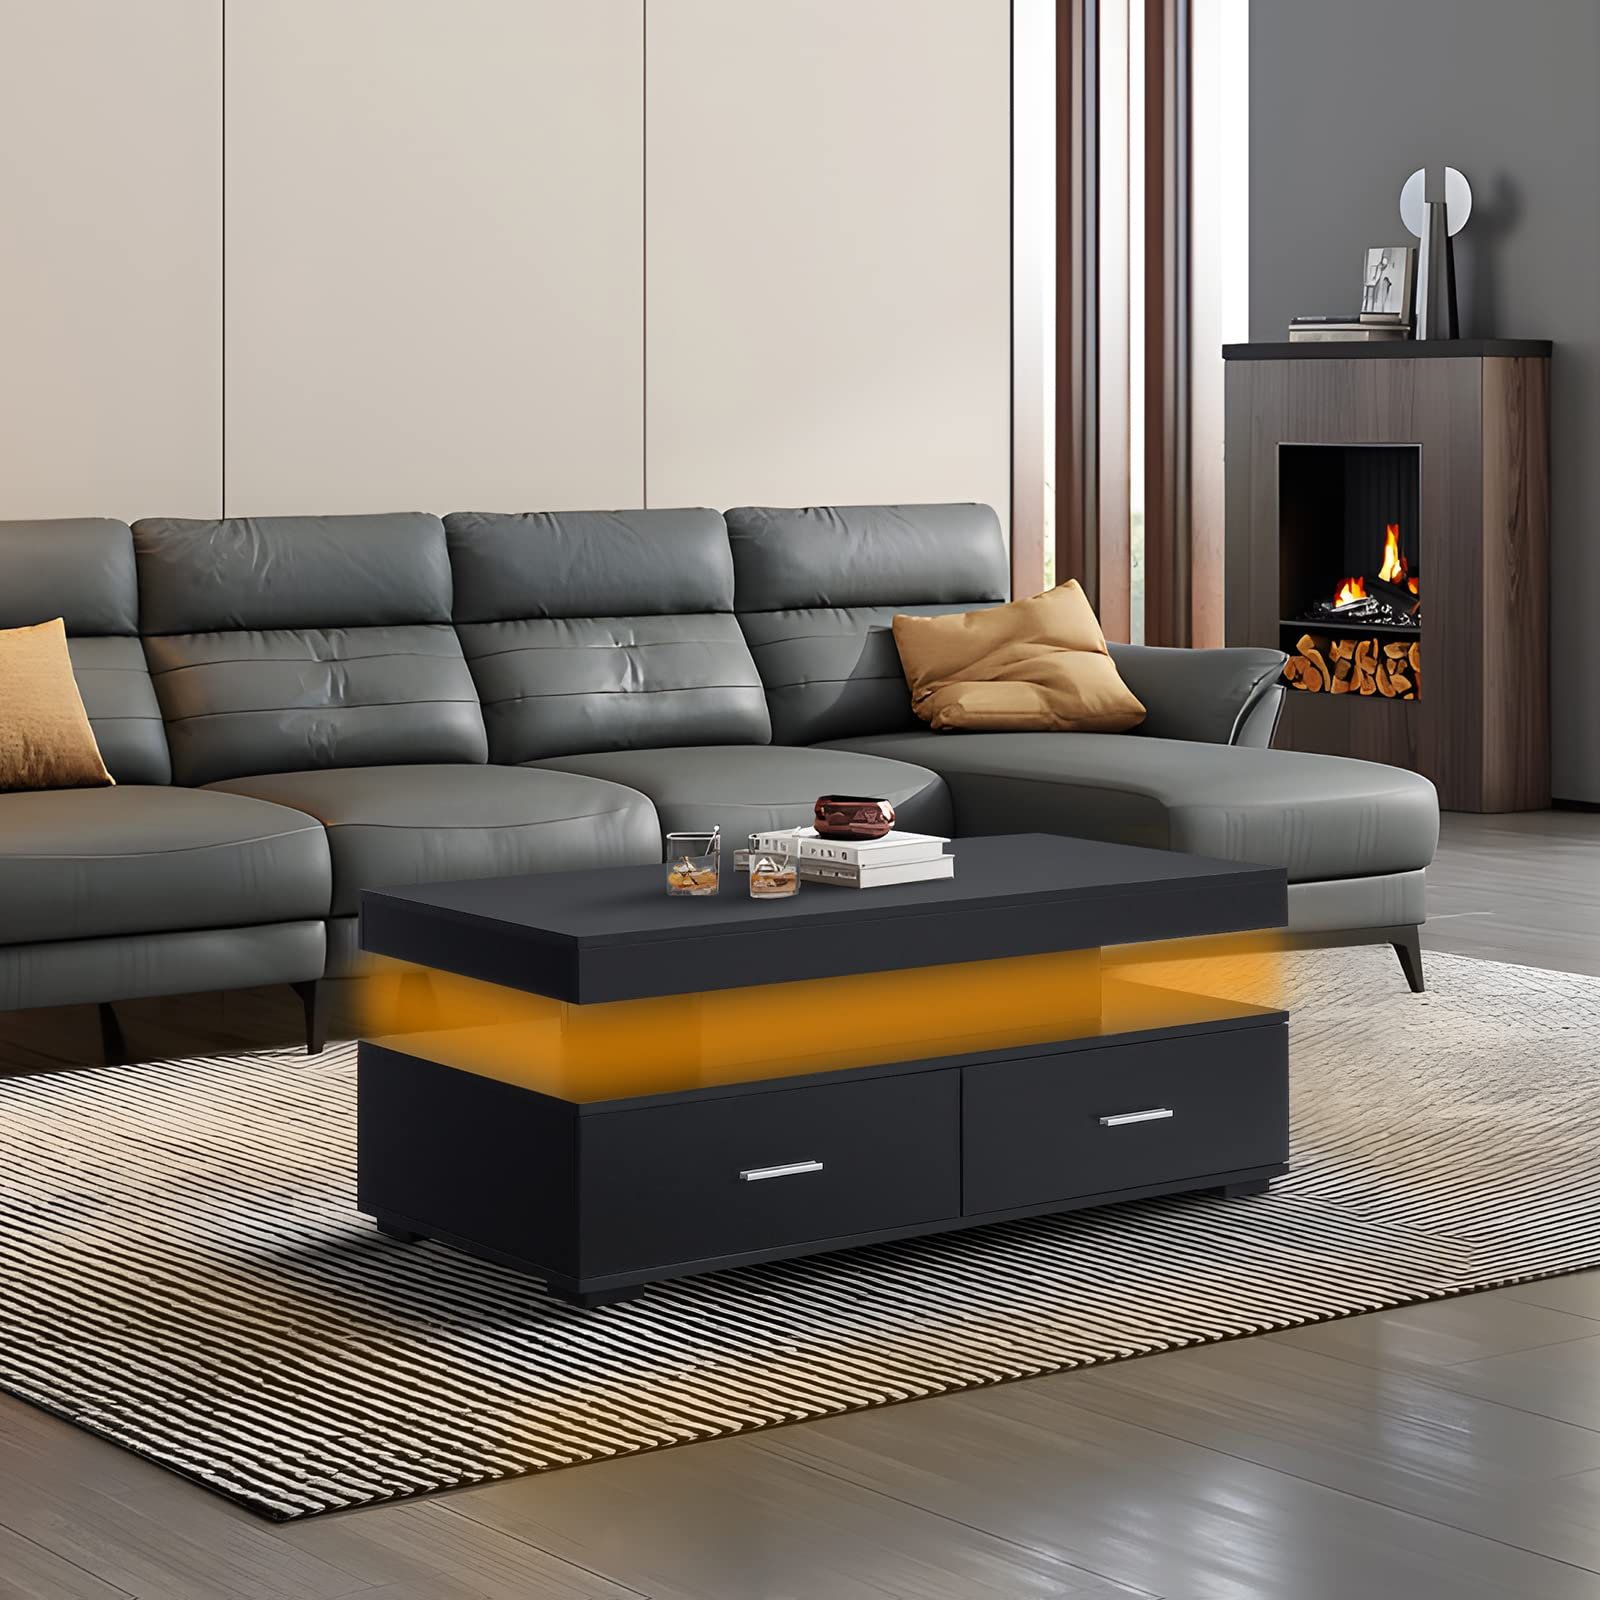 Usikey Led Coffee Table For Living Room, Coffee Table With Lights Within Coffee Tables With Led Lights (View 15 of 20)